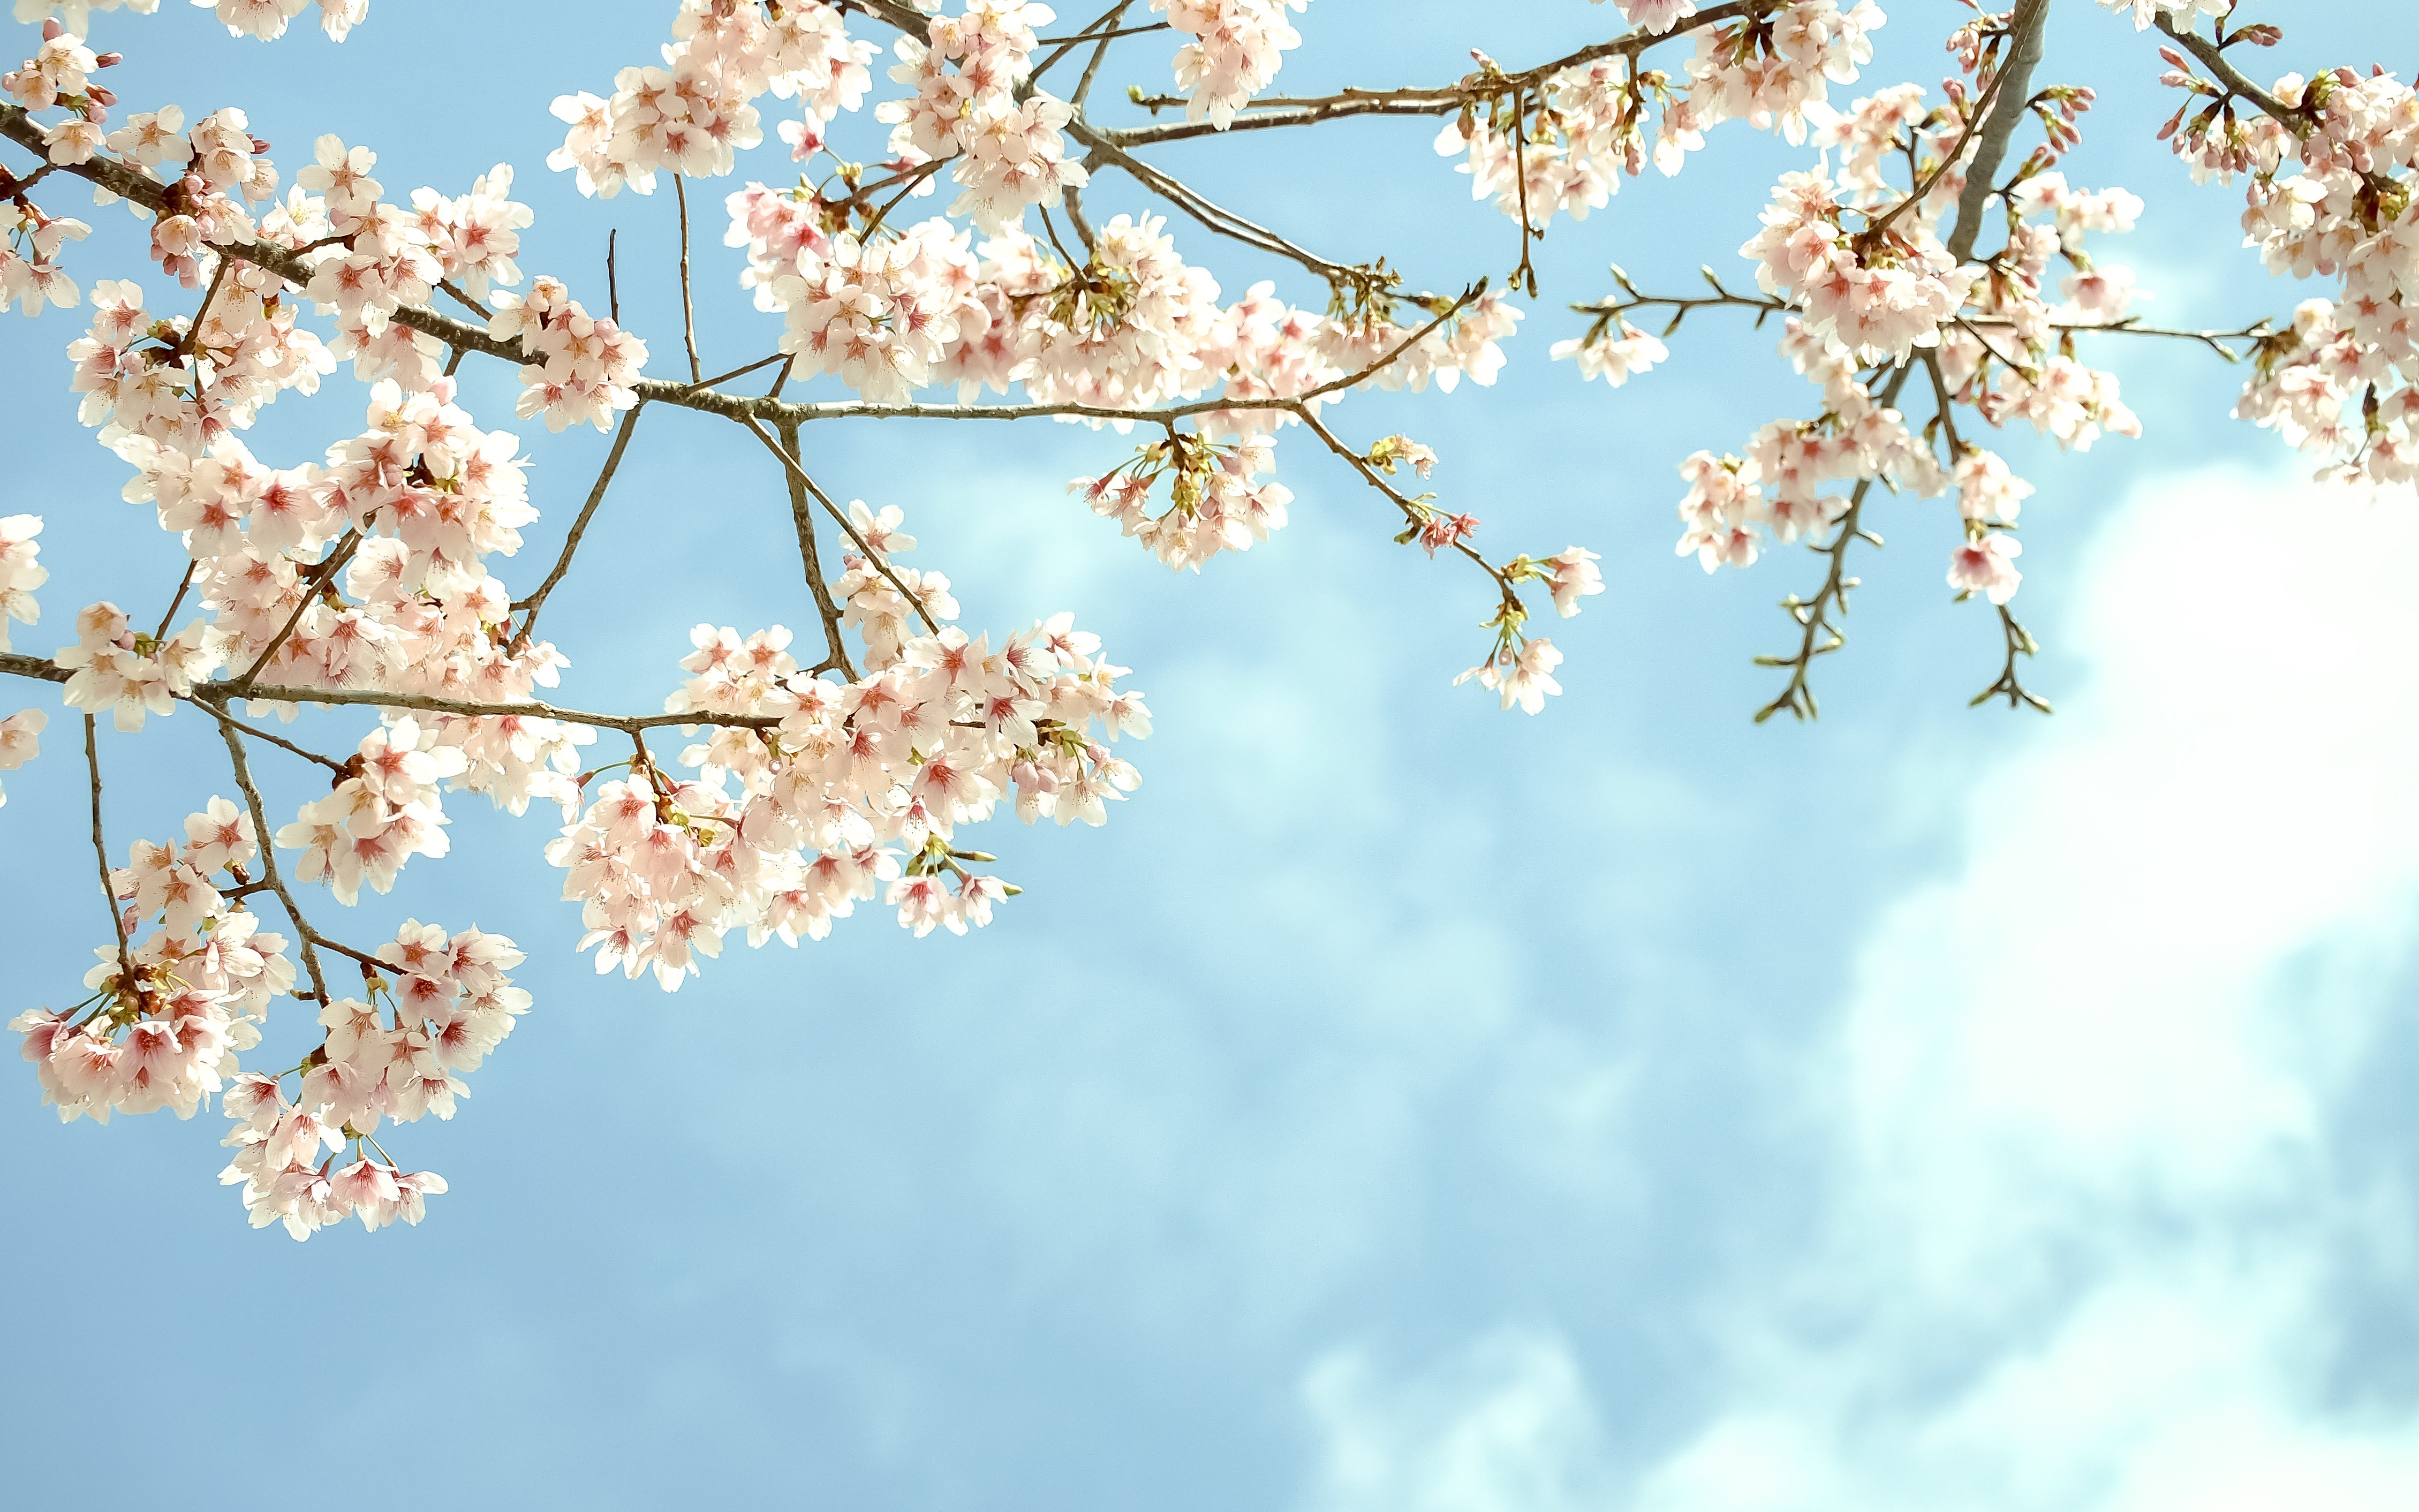 Flowers blooms branches tree wallpaper 4518x2824 354887